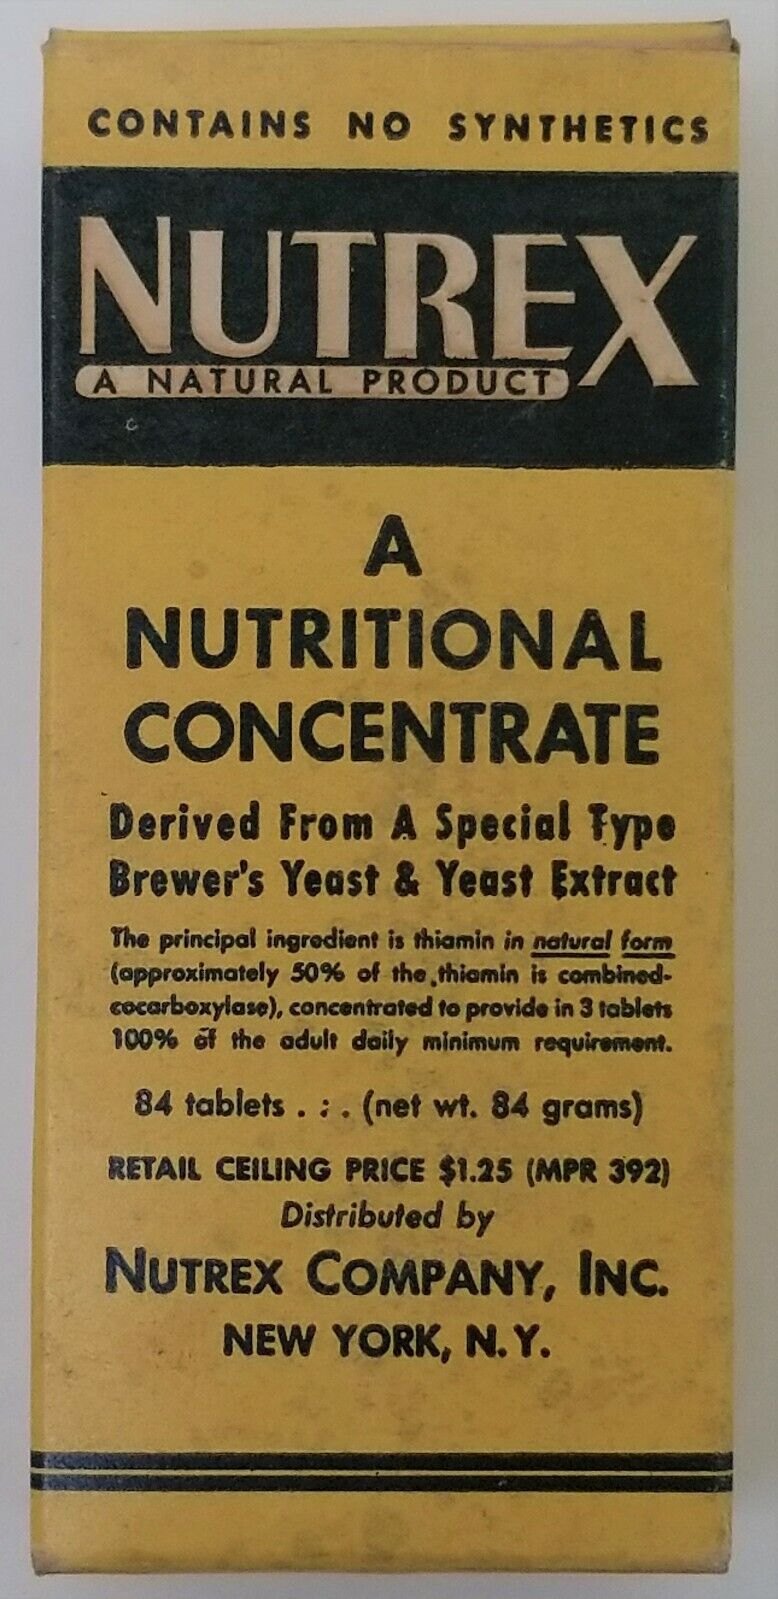 Vintage Nutrex Apothecary Pharmaceutical OTC Medicine Nutritional Concentrate